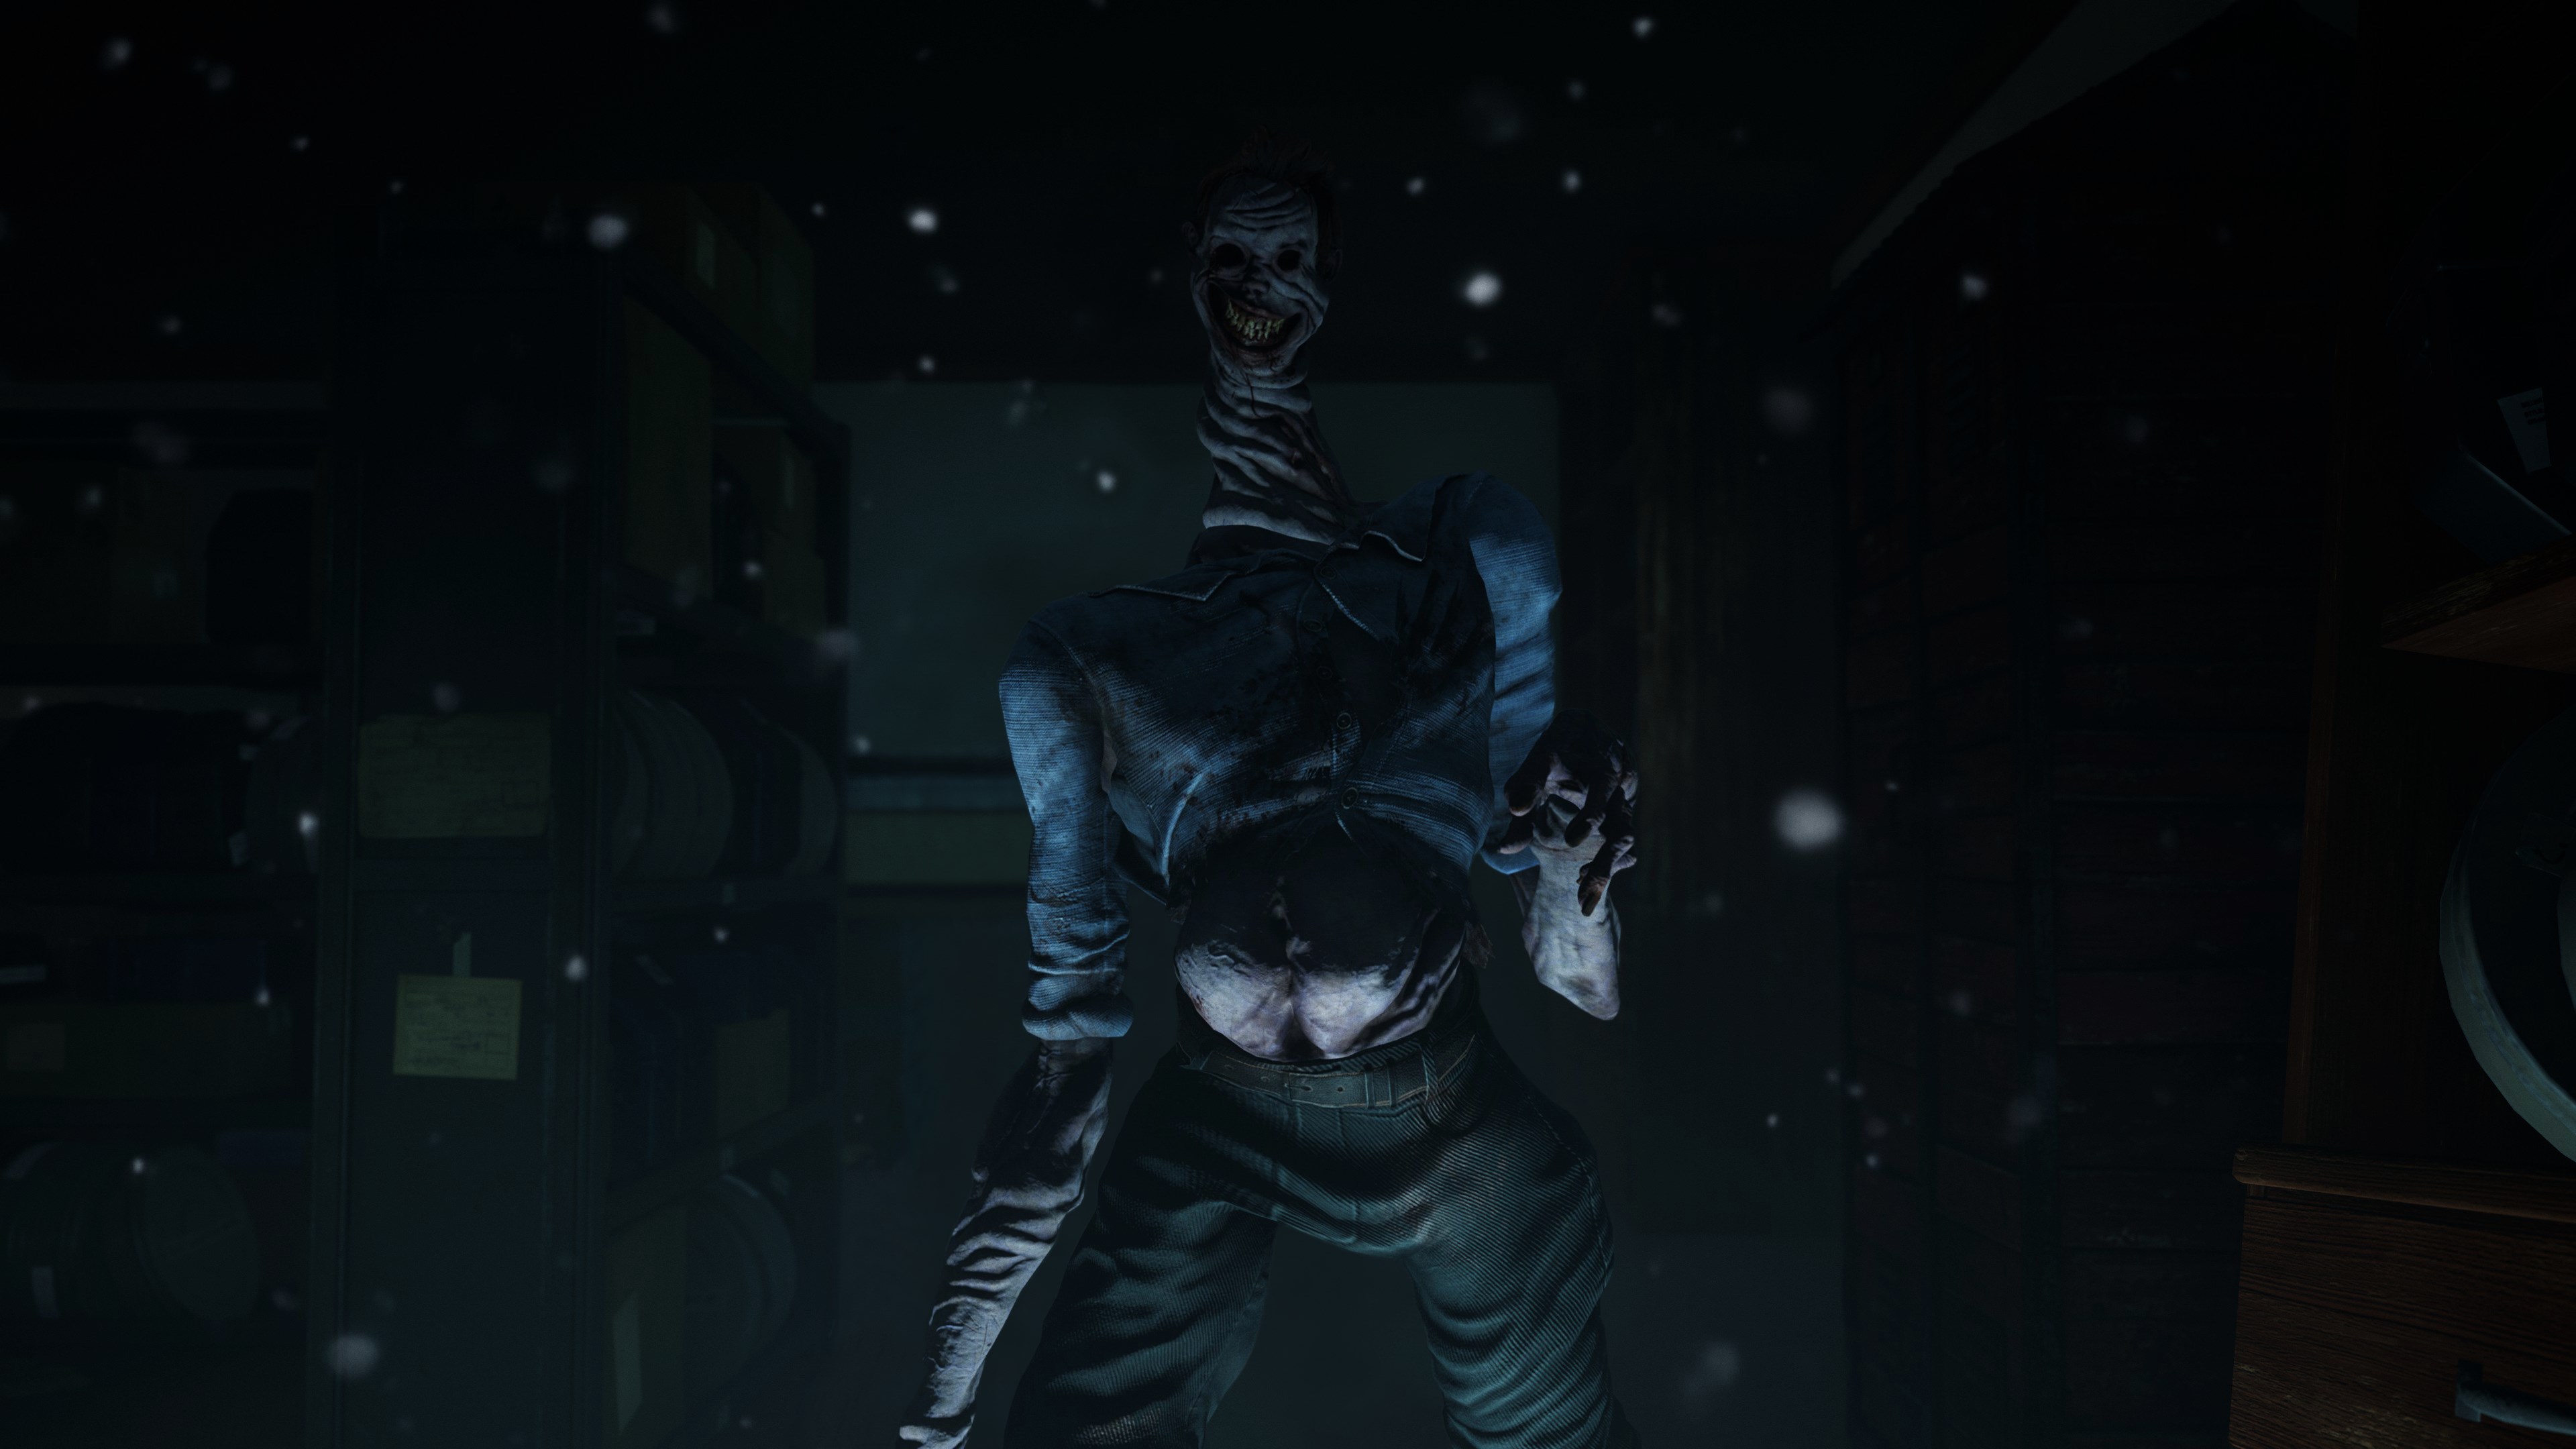 Dead by Daylight - All Things Wicked screenshot 66224